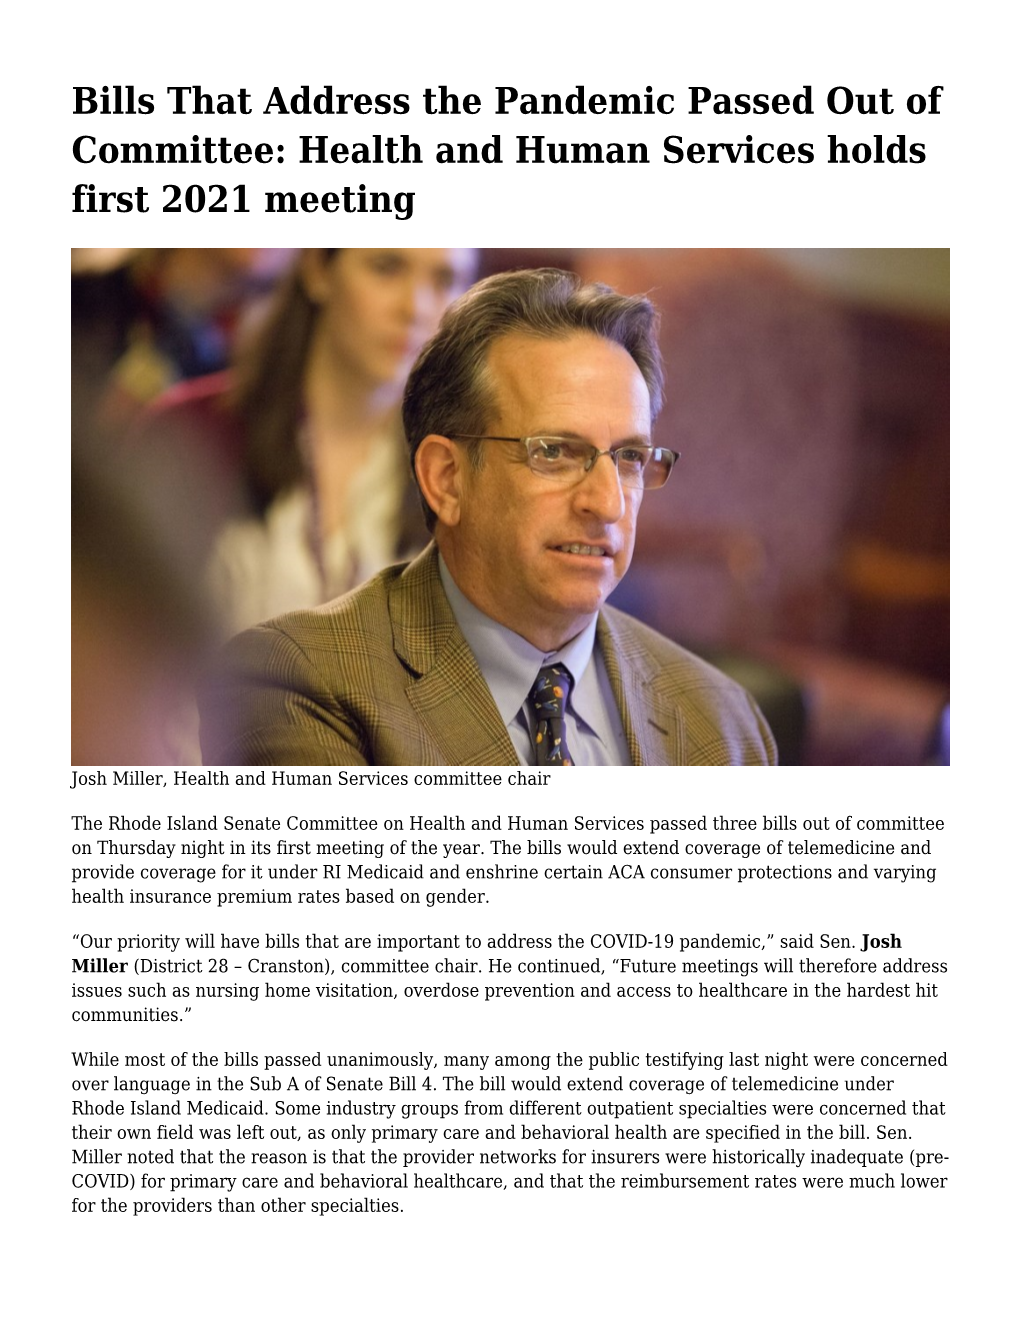 Bills That Address the Pandemic Passed out of Committee: Health and Human Services Holds First 2021 Meeting